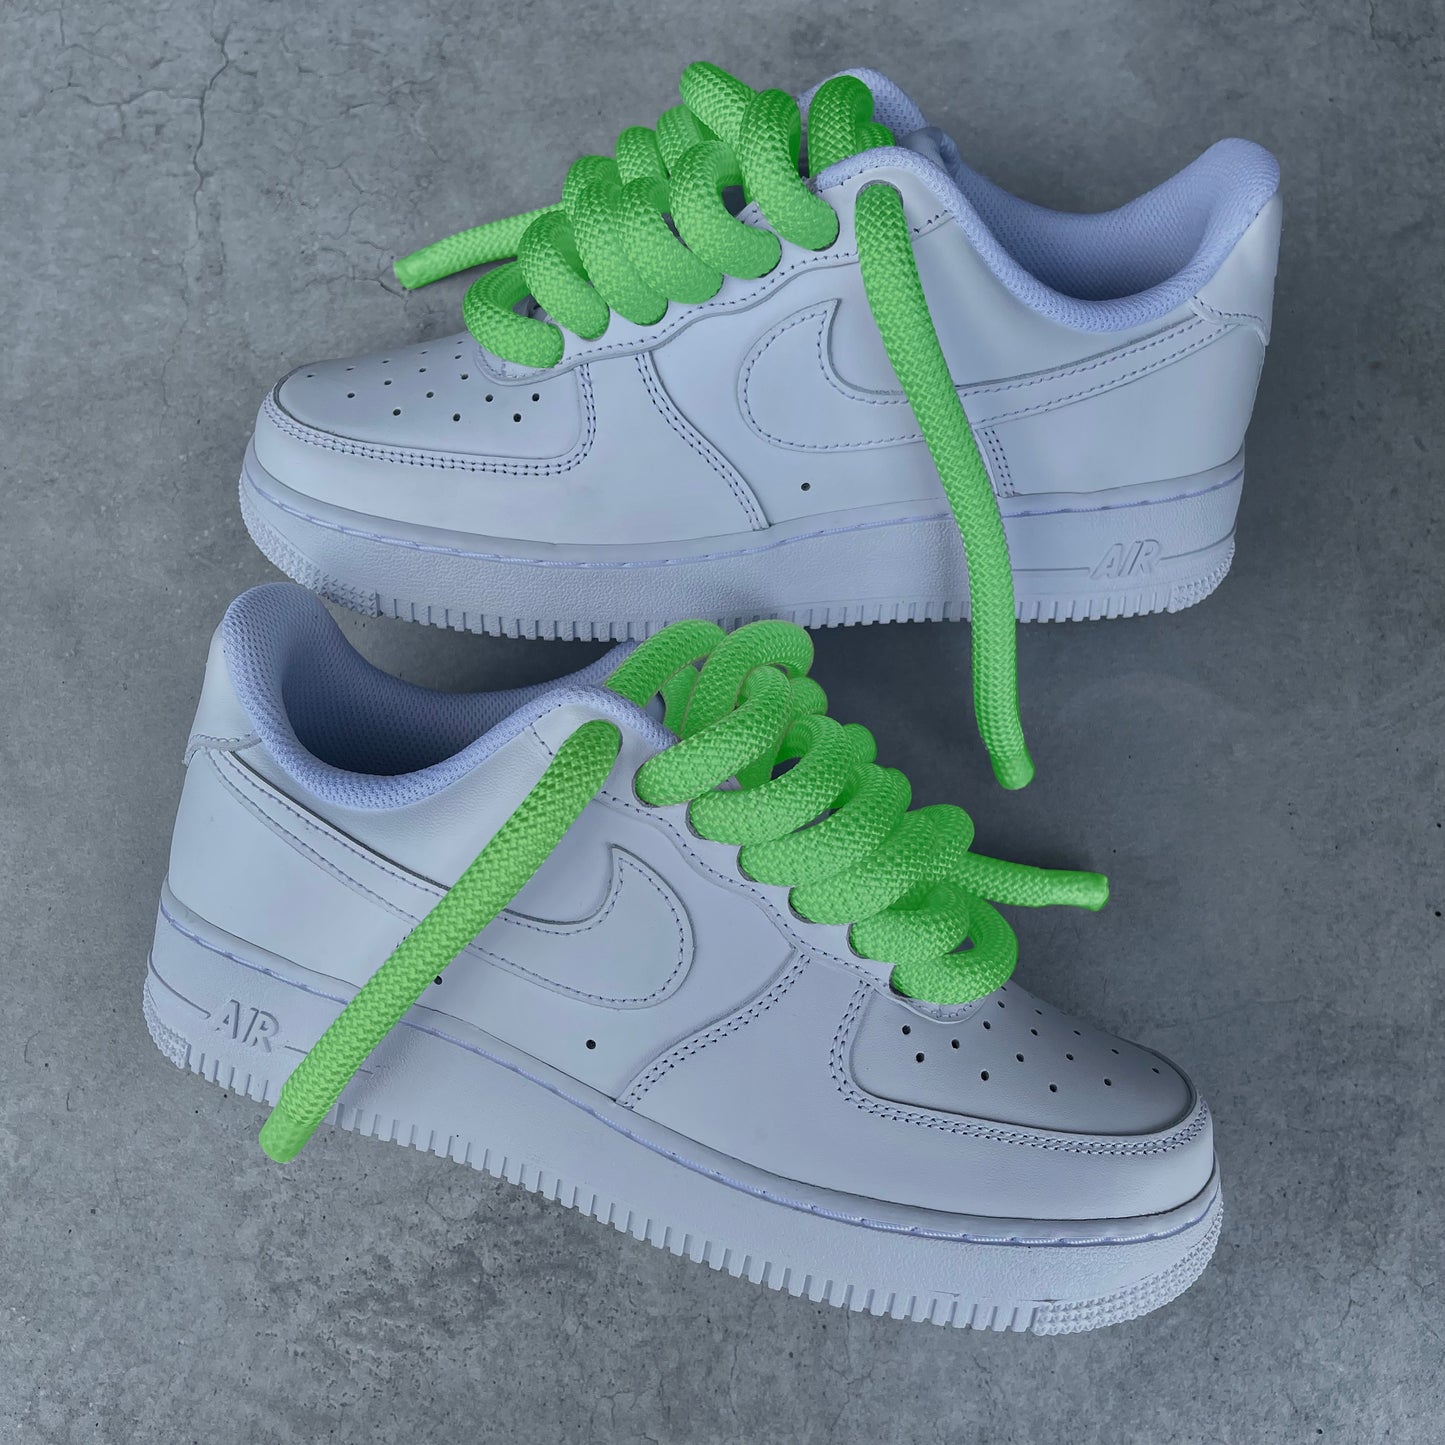 Custom AIR FORCE 1 - Rope laces 2.0 (bright green)